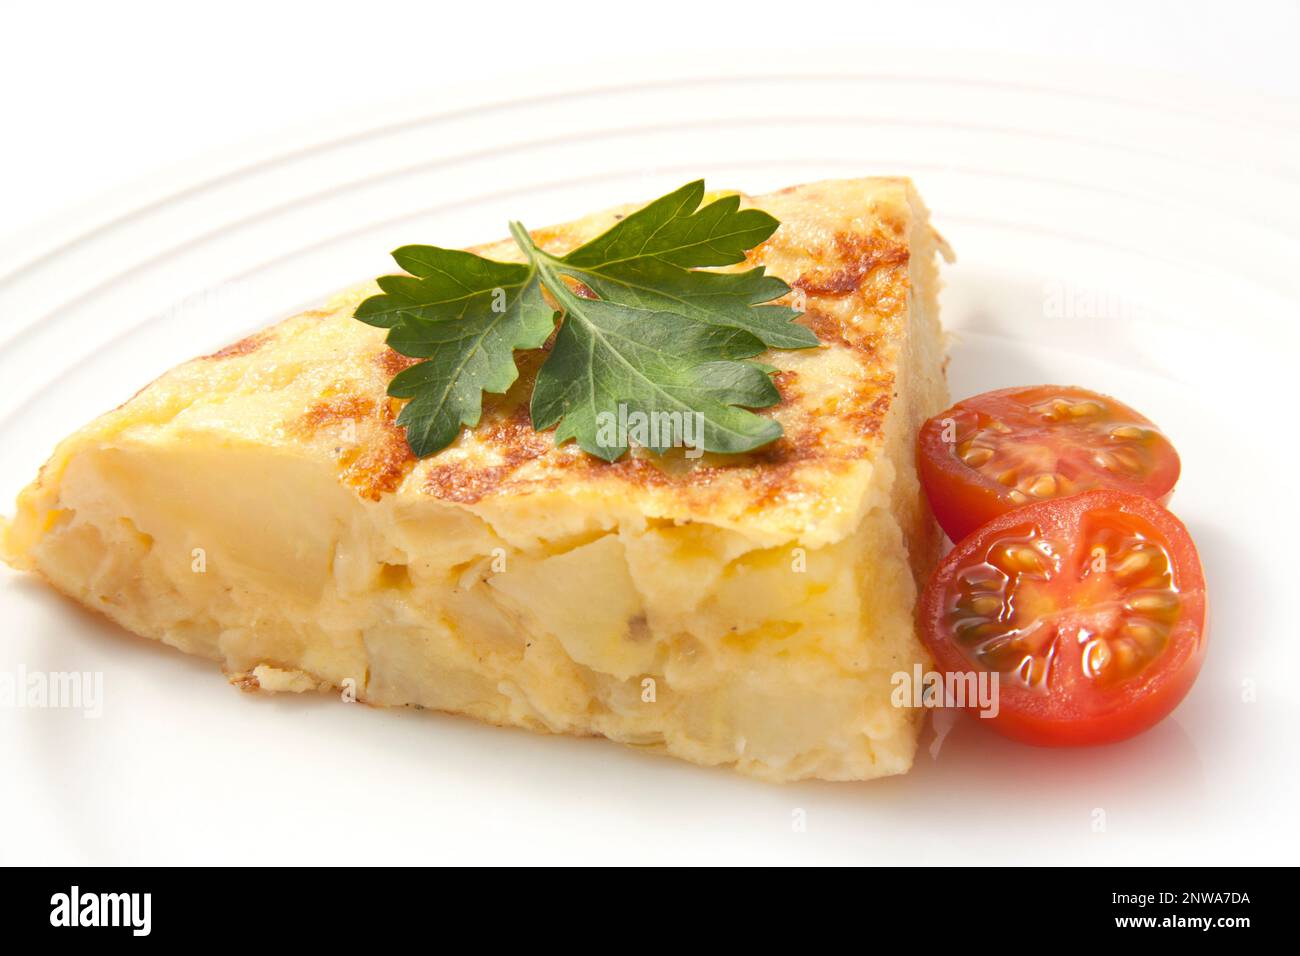 Tortilla española. Spanish omelette with potatoes and onion. Stock Photo